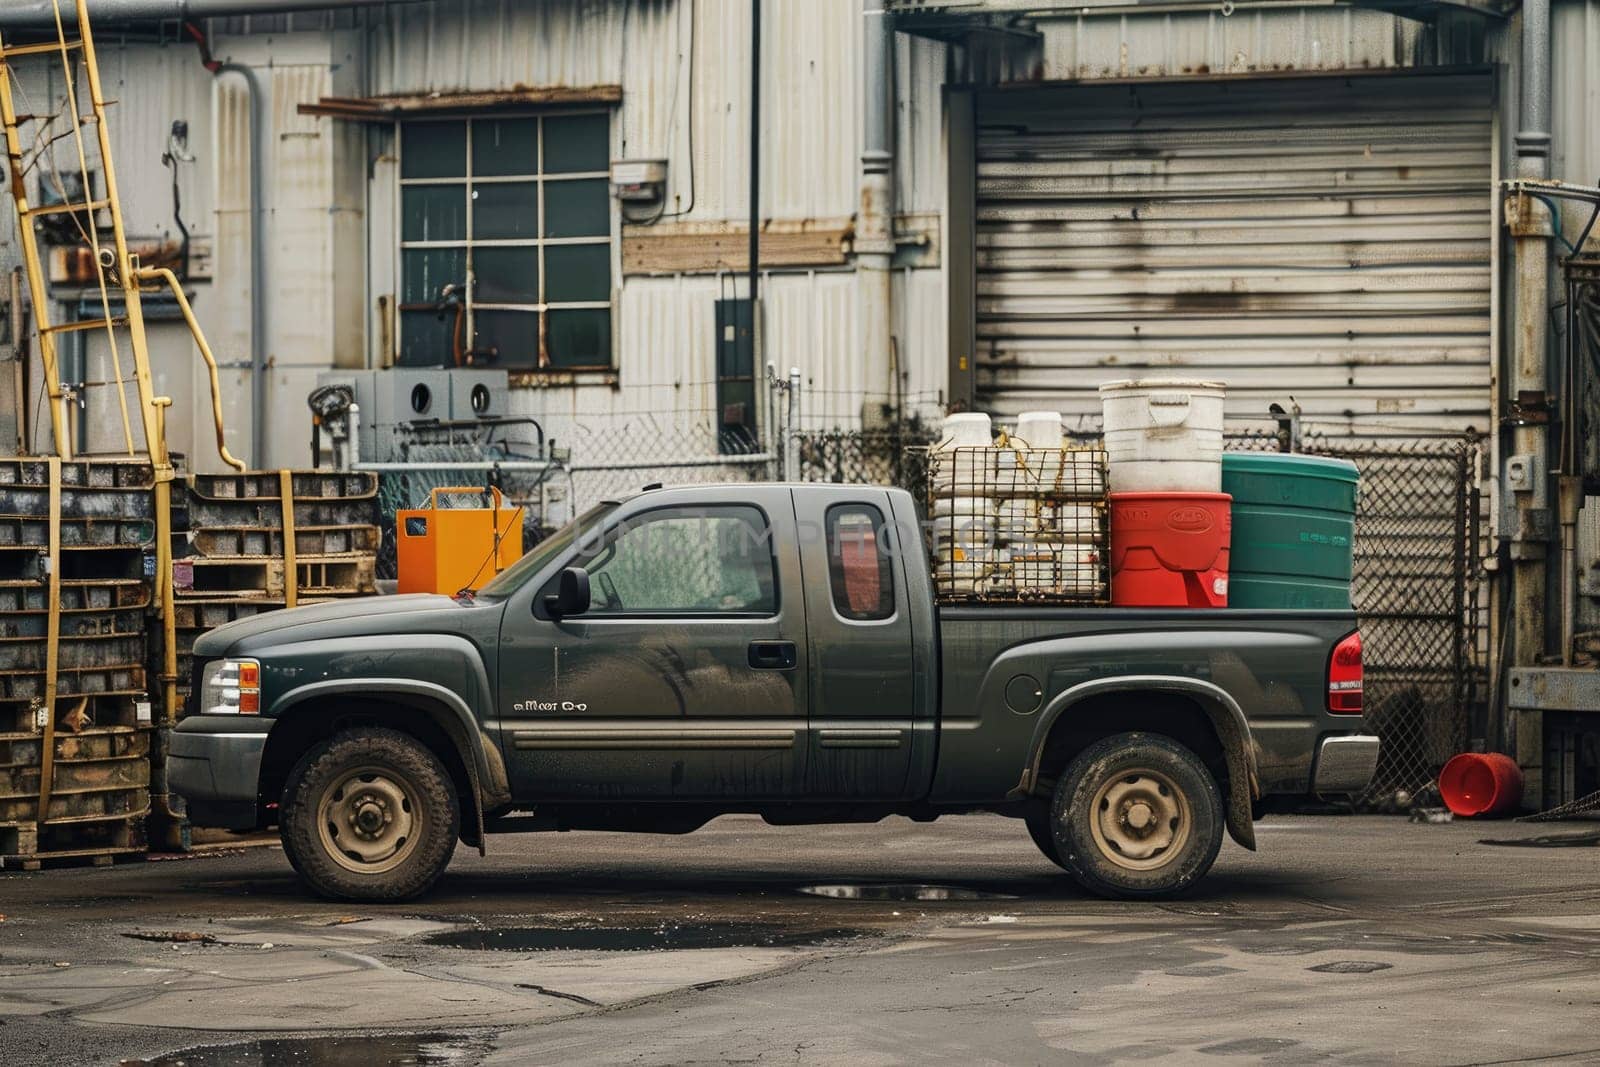 A pickup truck loaded with cargo in an industrial setting